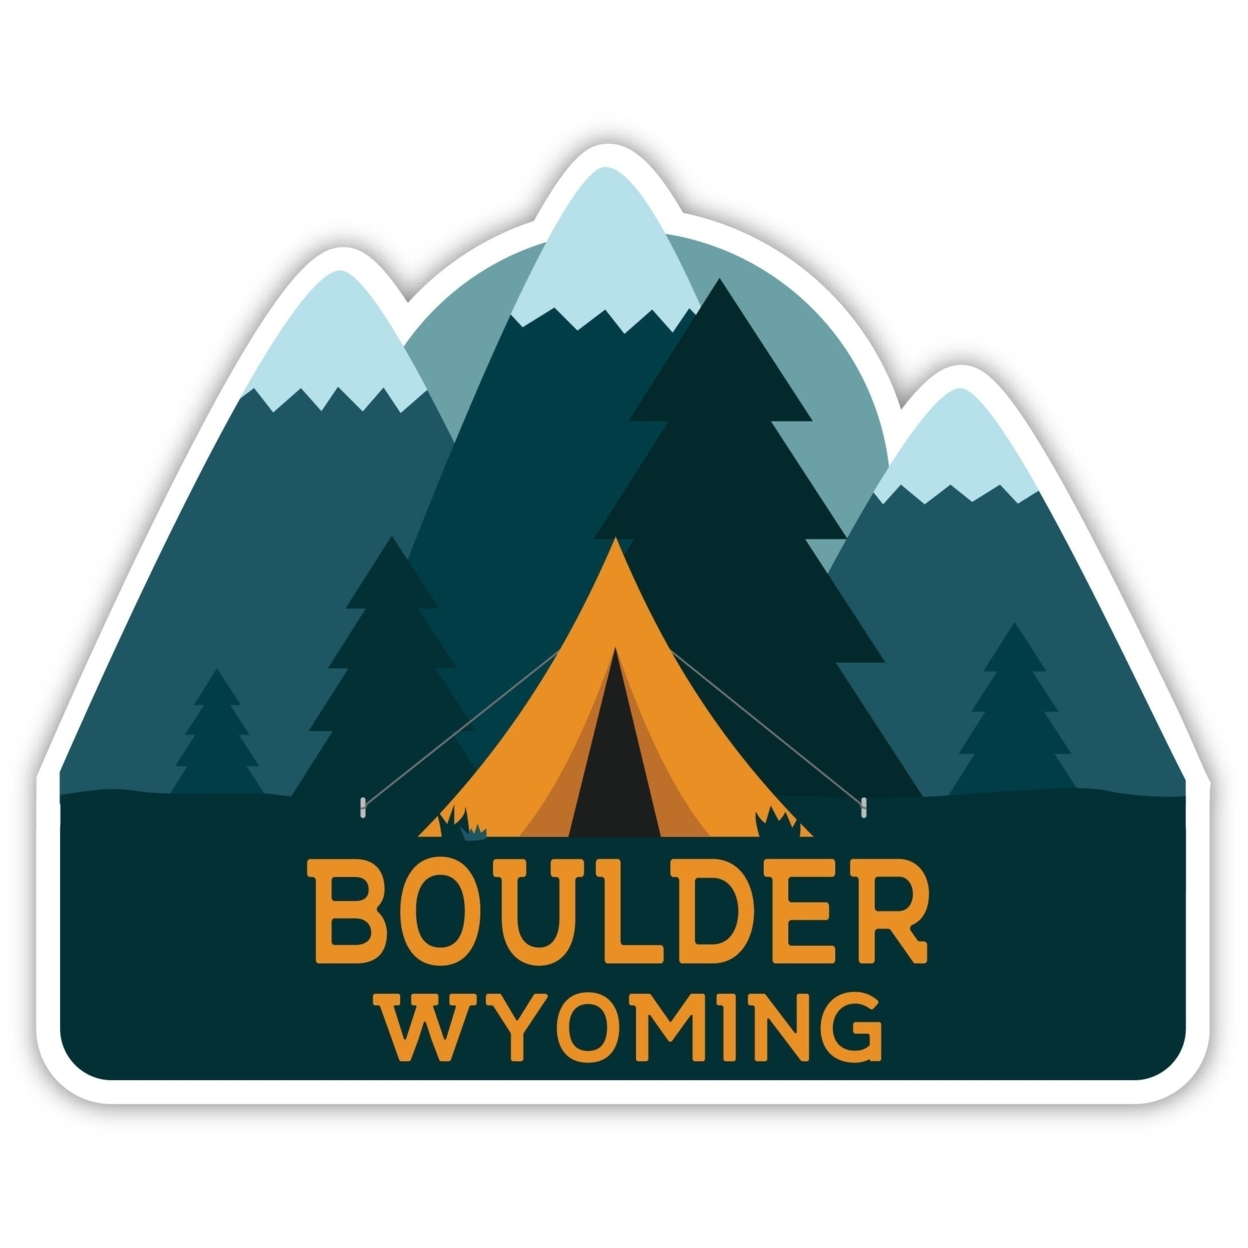 Boulder Wyoming Souvenir Decorative Stickers (Choose Theme And Size) - 4-Pack, 4-Inch, Tent